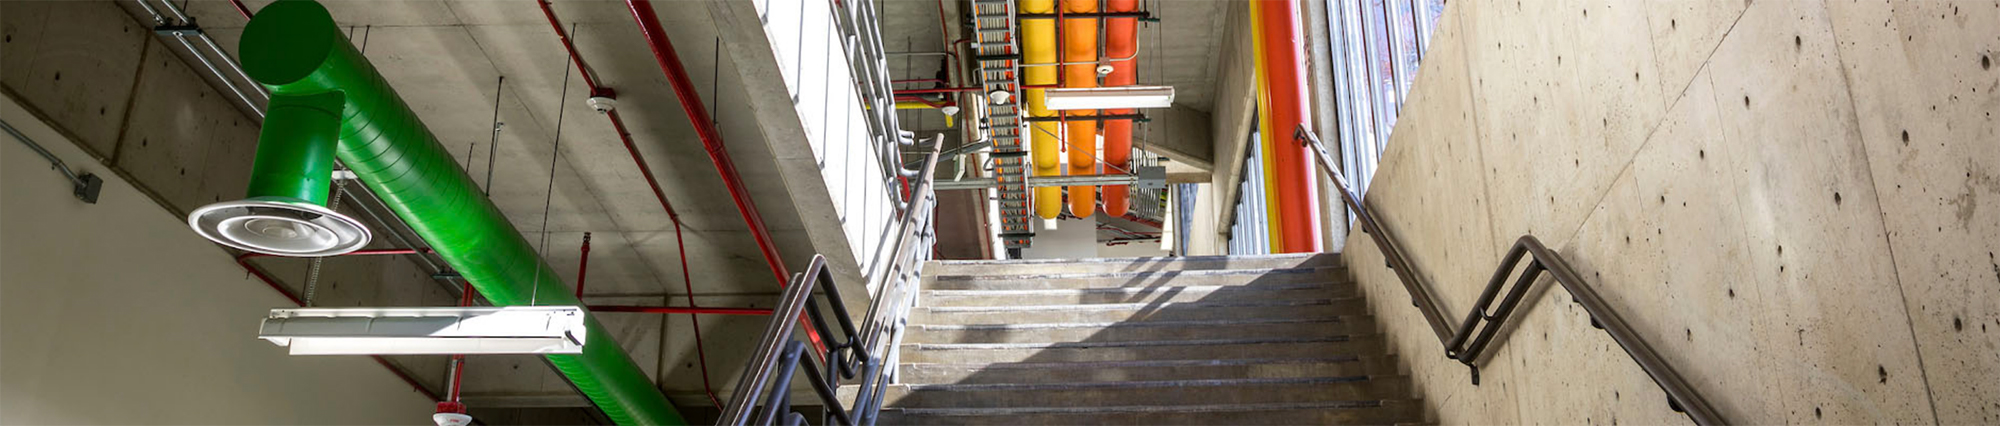 stairs on uvu main campus in the Gunther Technology Building